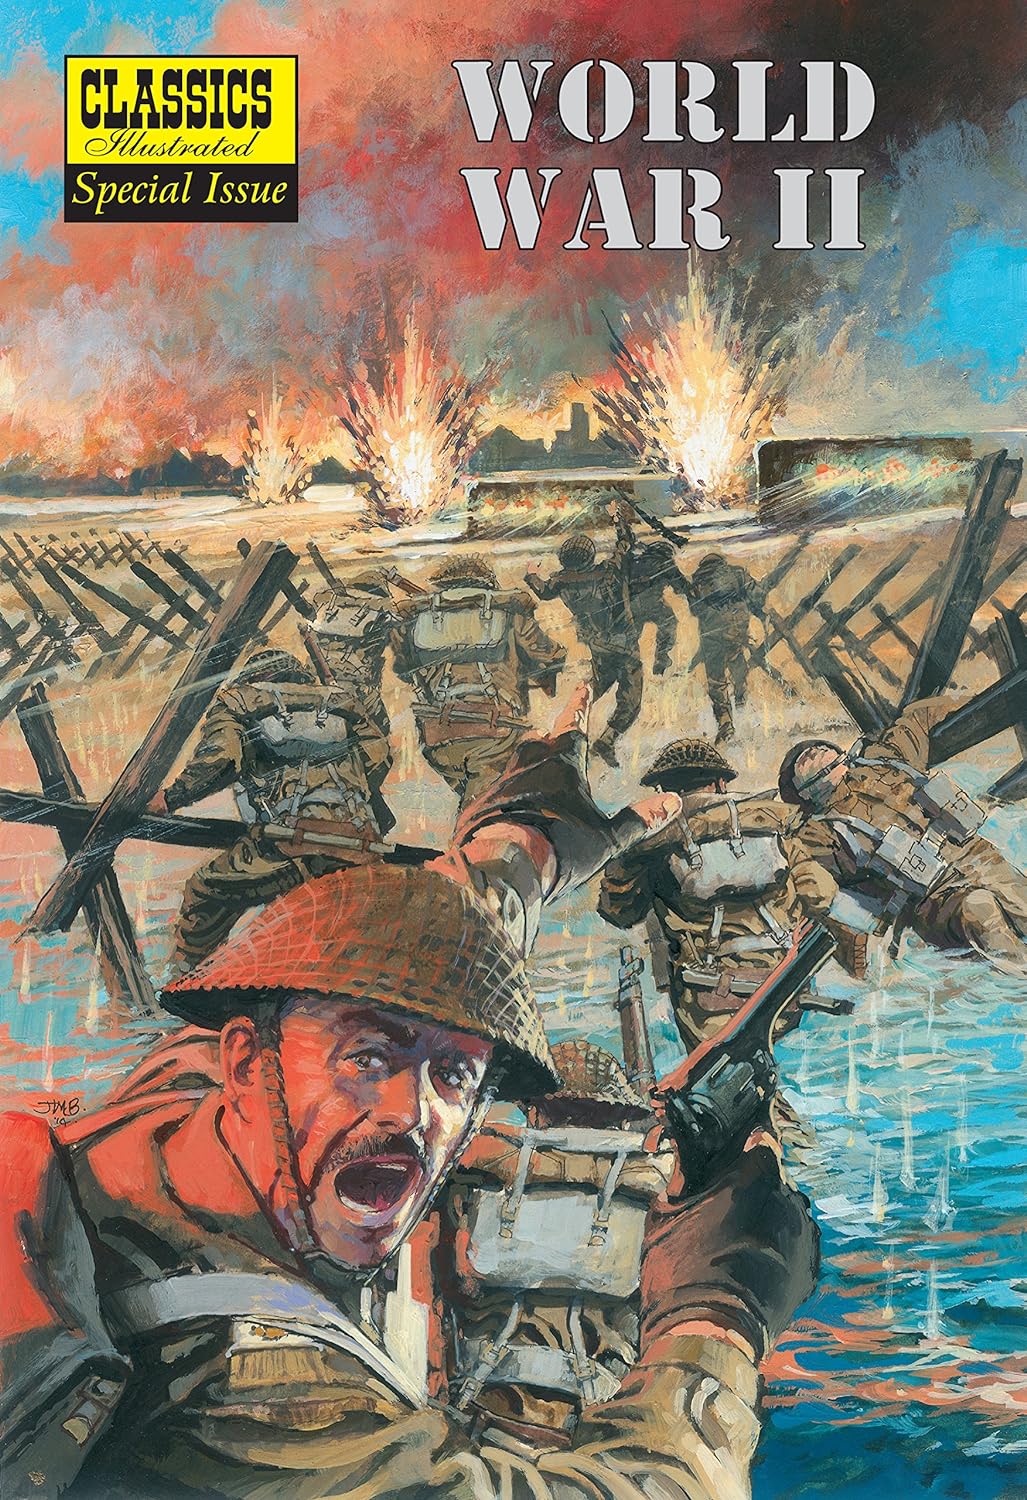 World War II: The Illustrated Story of the Second World War (Classics Illustrated Special Issue, 2014)